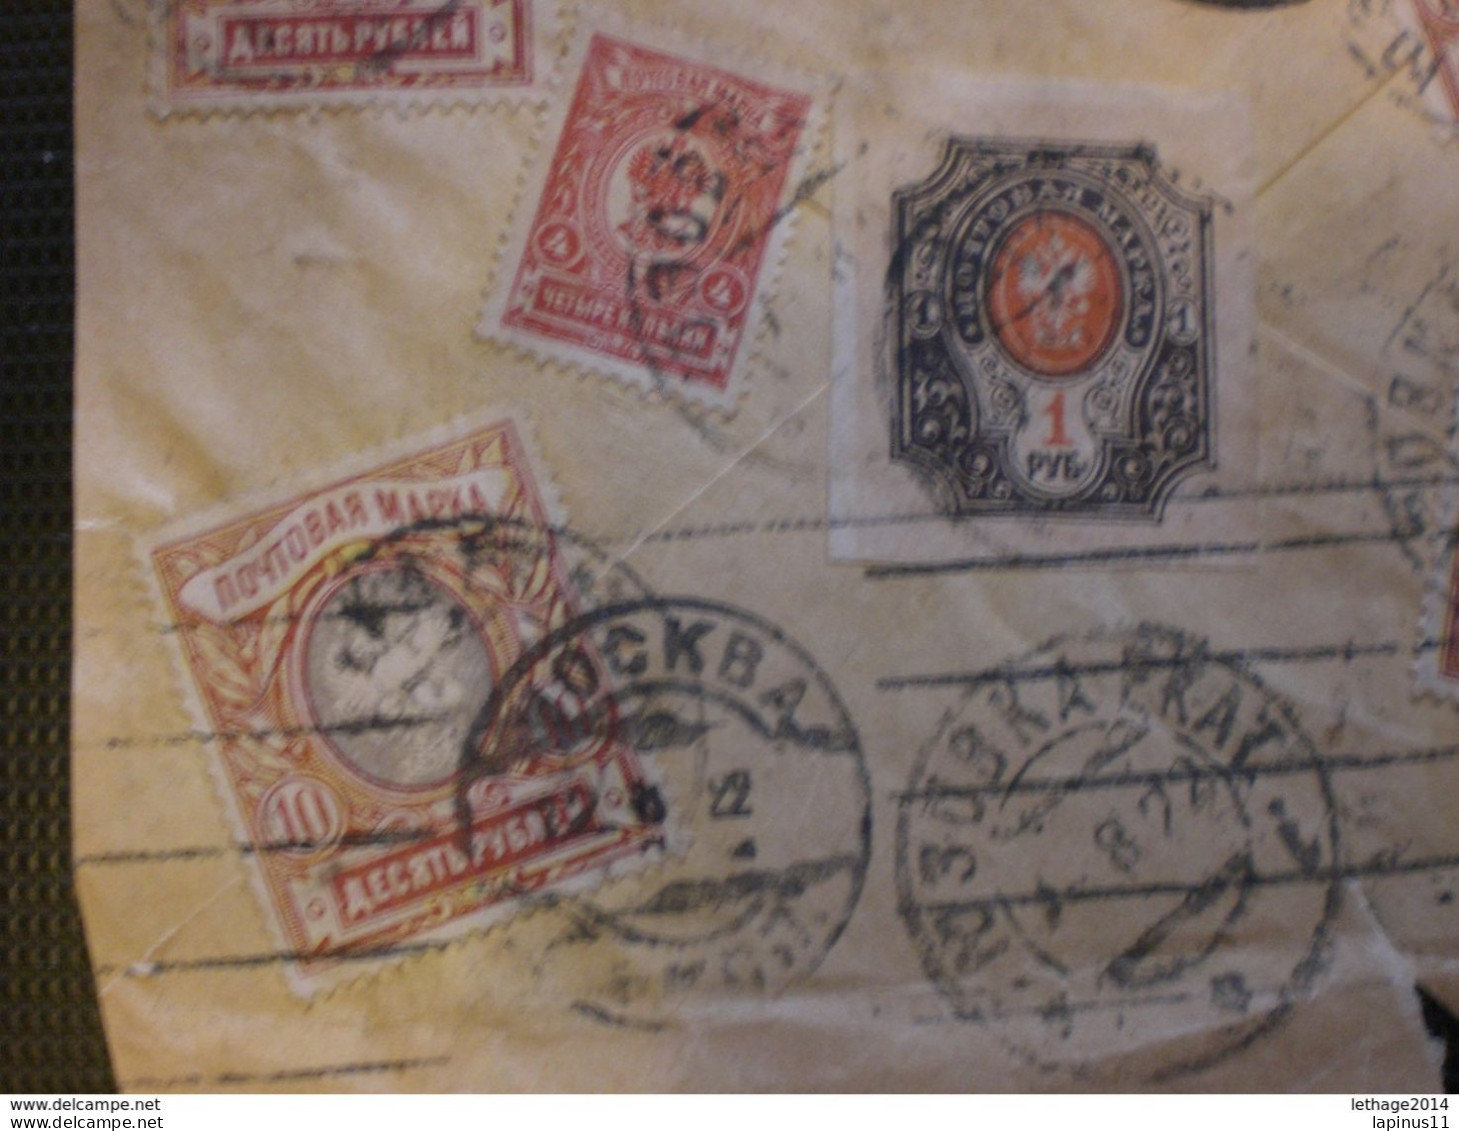 RUSSIA RUSSIE РОССИЯ STAMPS COVER 1922 REGISTER MAIL RUSSIA TO ITALY OVER STAMPS FULL RRR RIF.TAGG. (127) - Briefe U. Dokumente